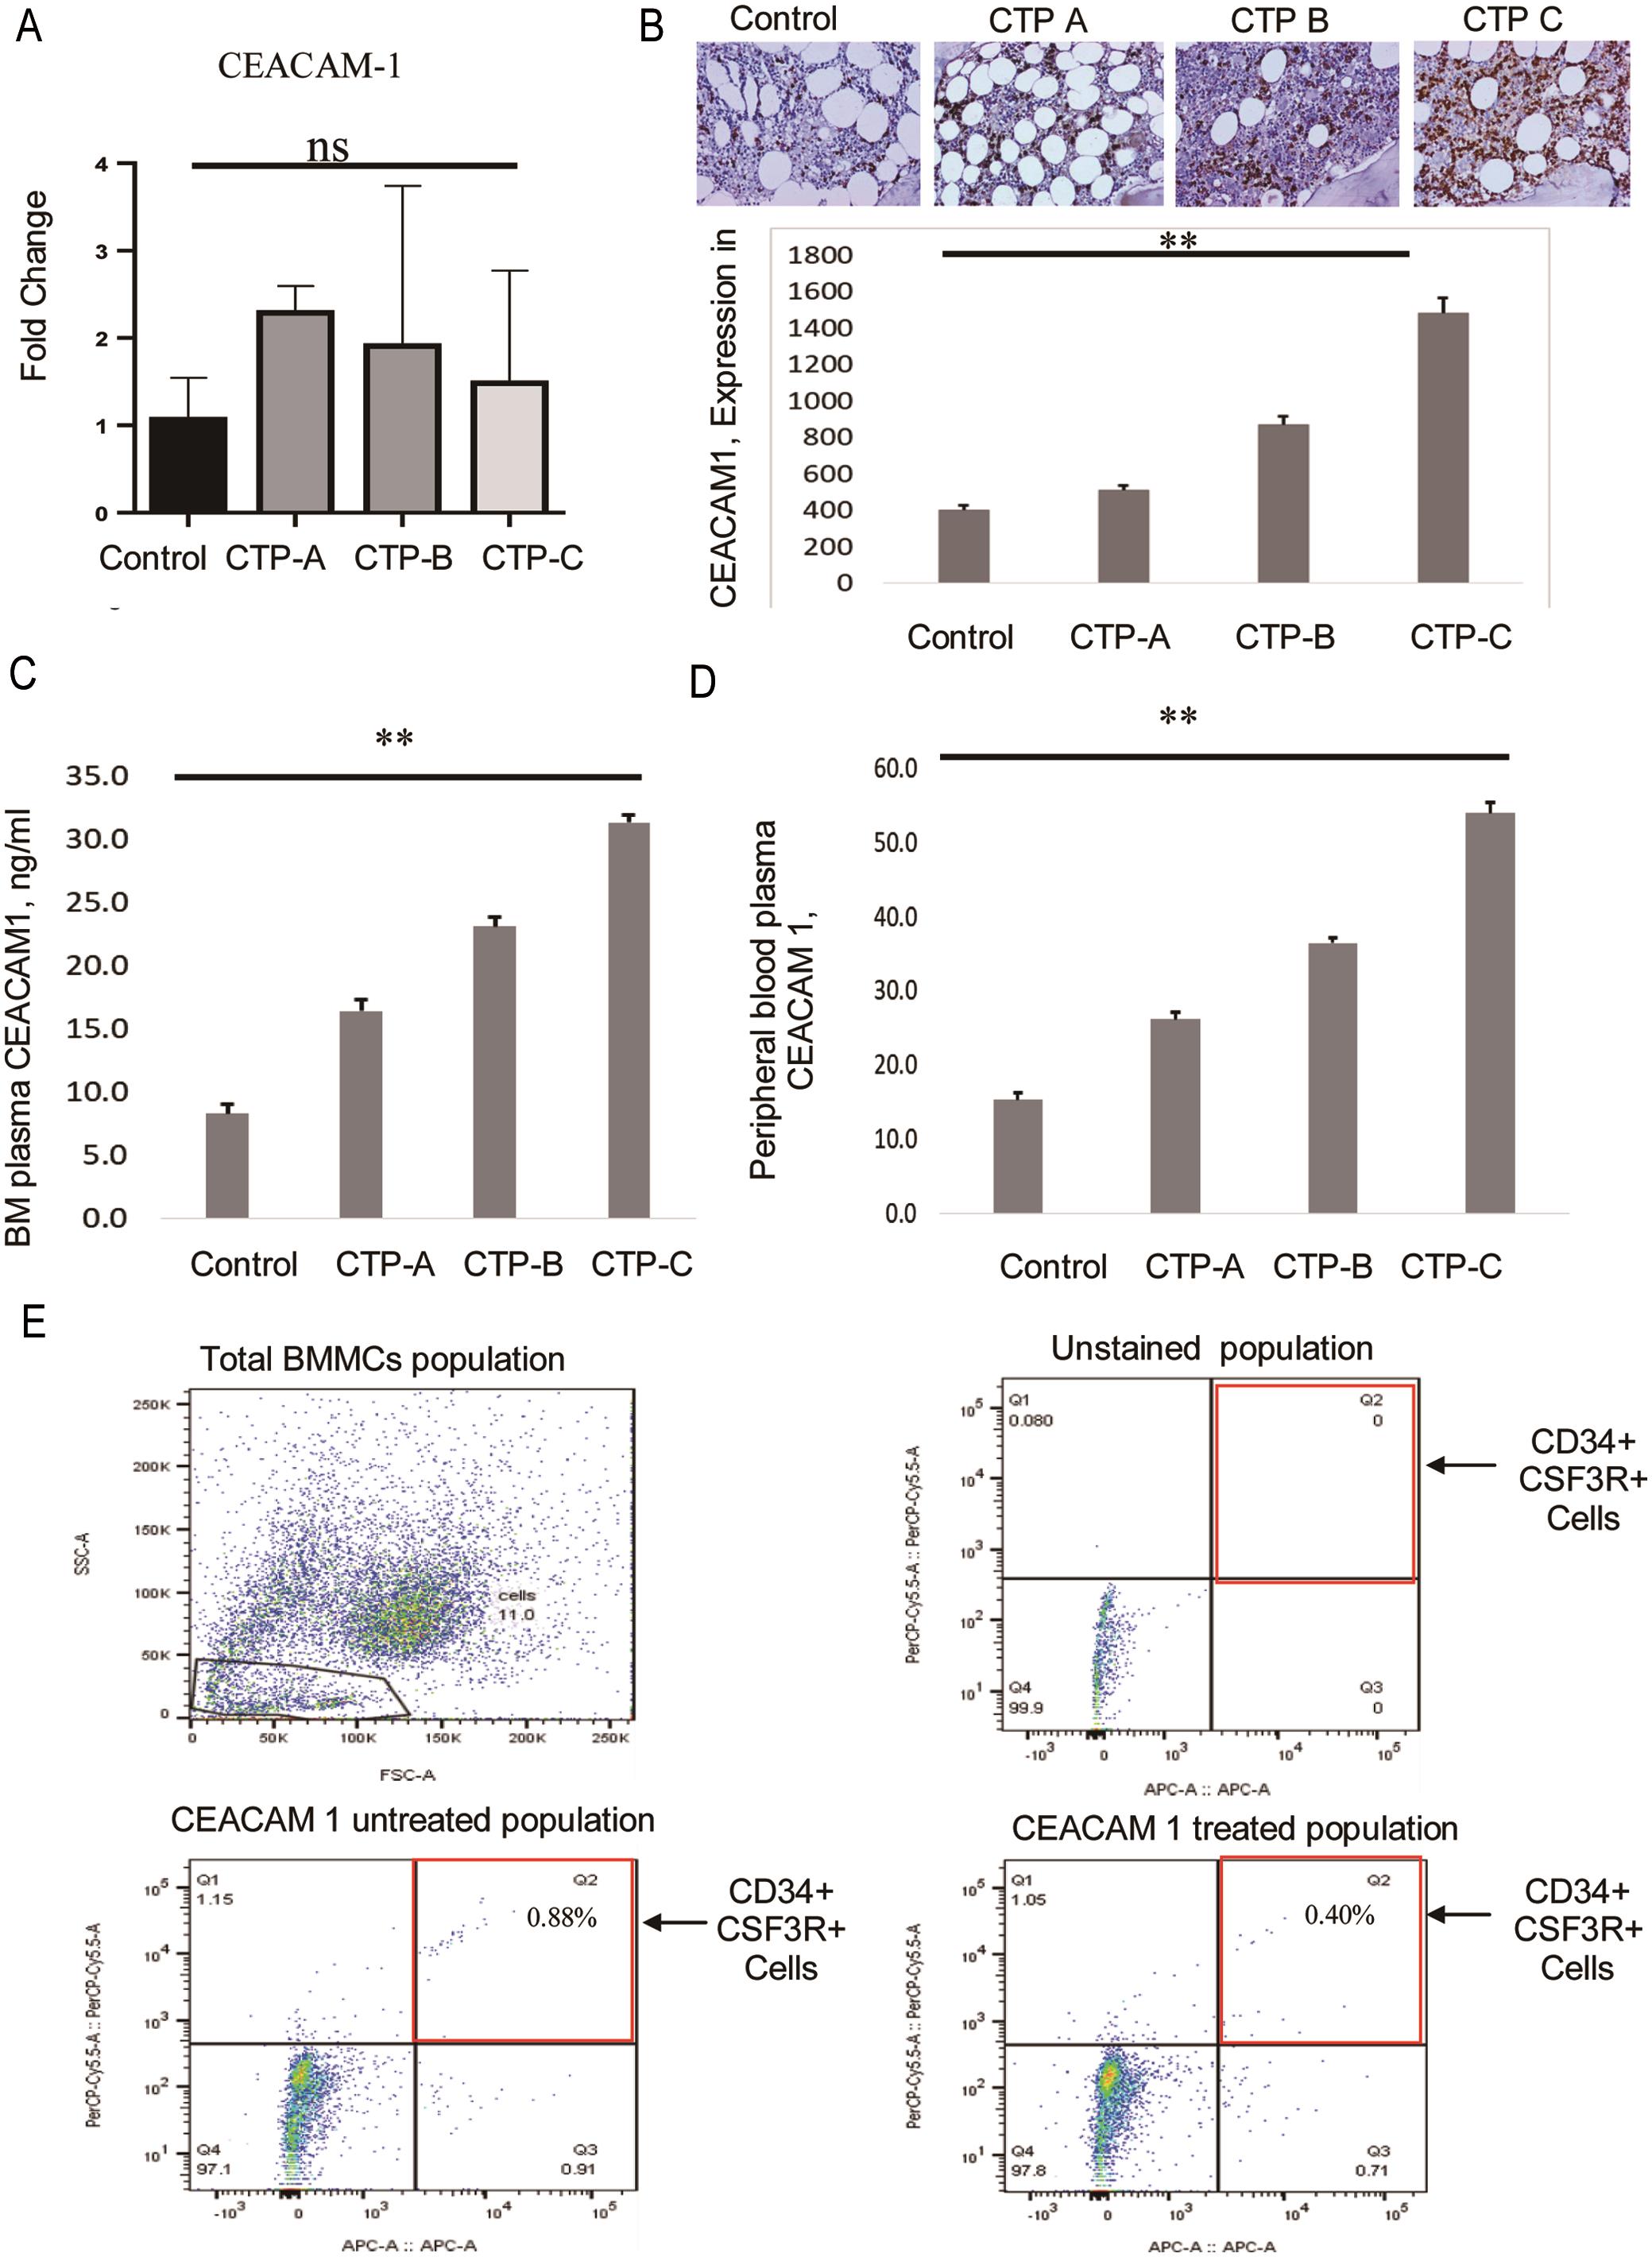 CEACAM-1 in cirrhosis and its association with CSF3R.